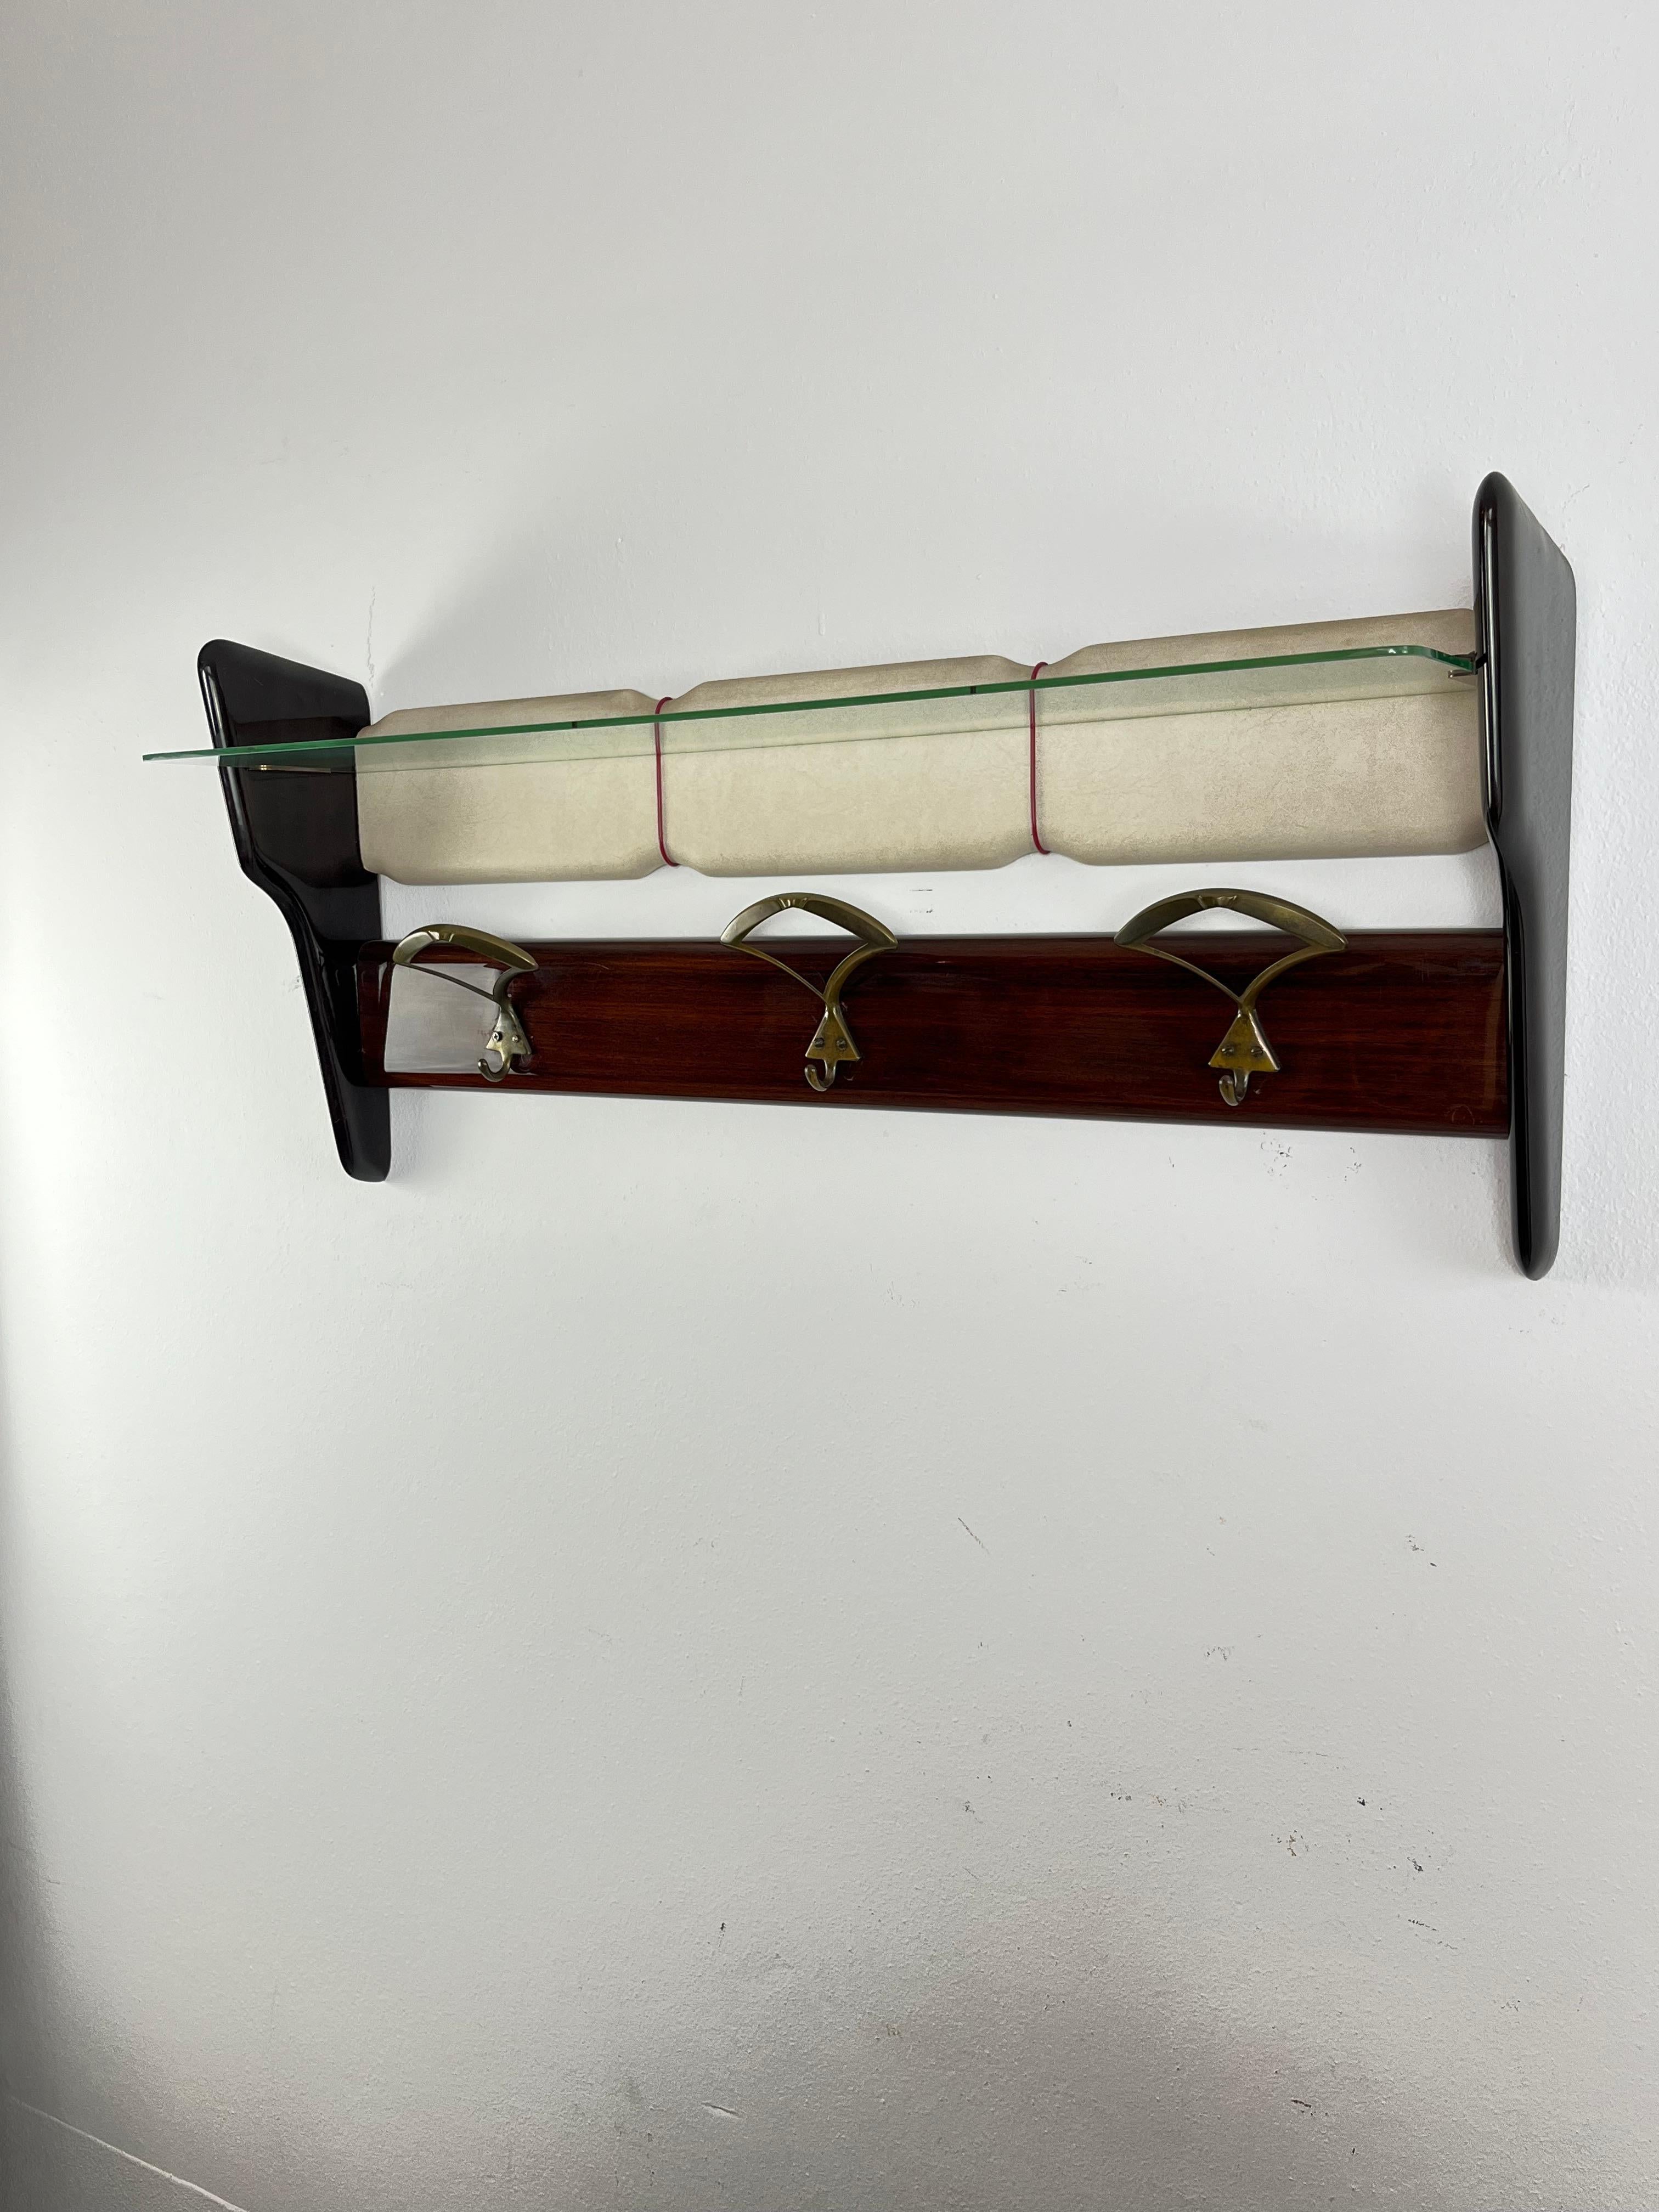 Mid-20th Century Mid-Century Wall Hanger Attributed to Ico Parisi 1960s Italian Design For Sale